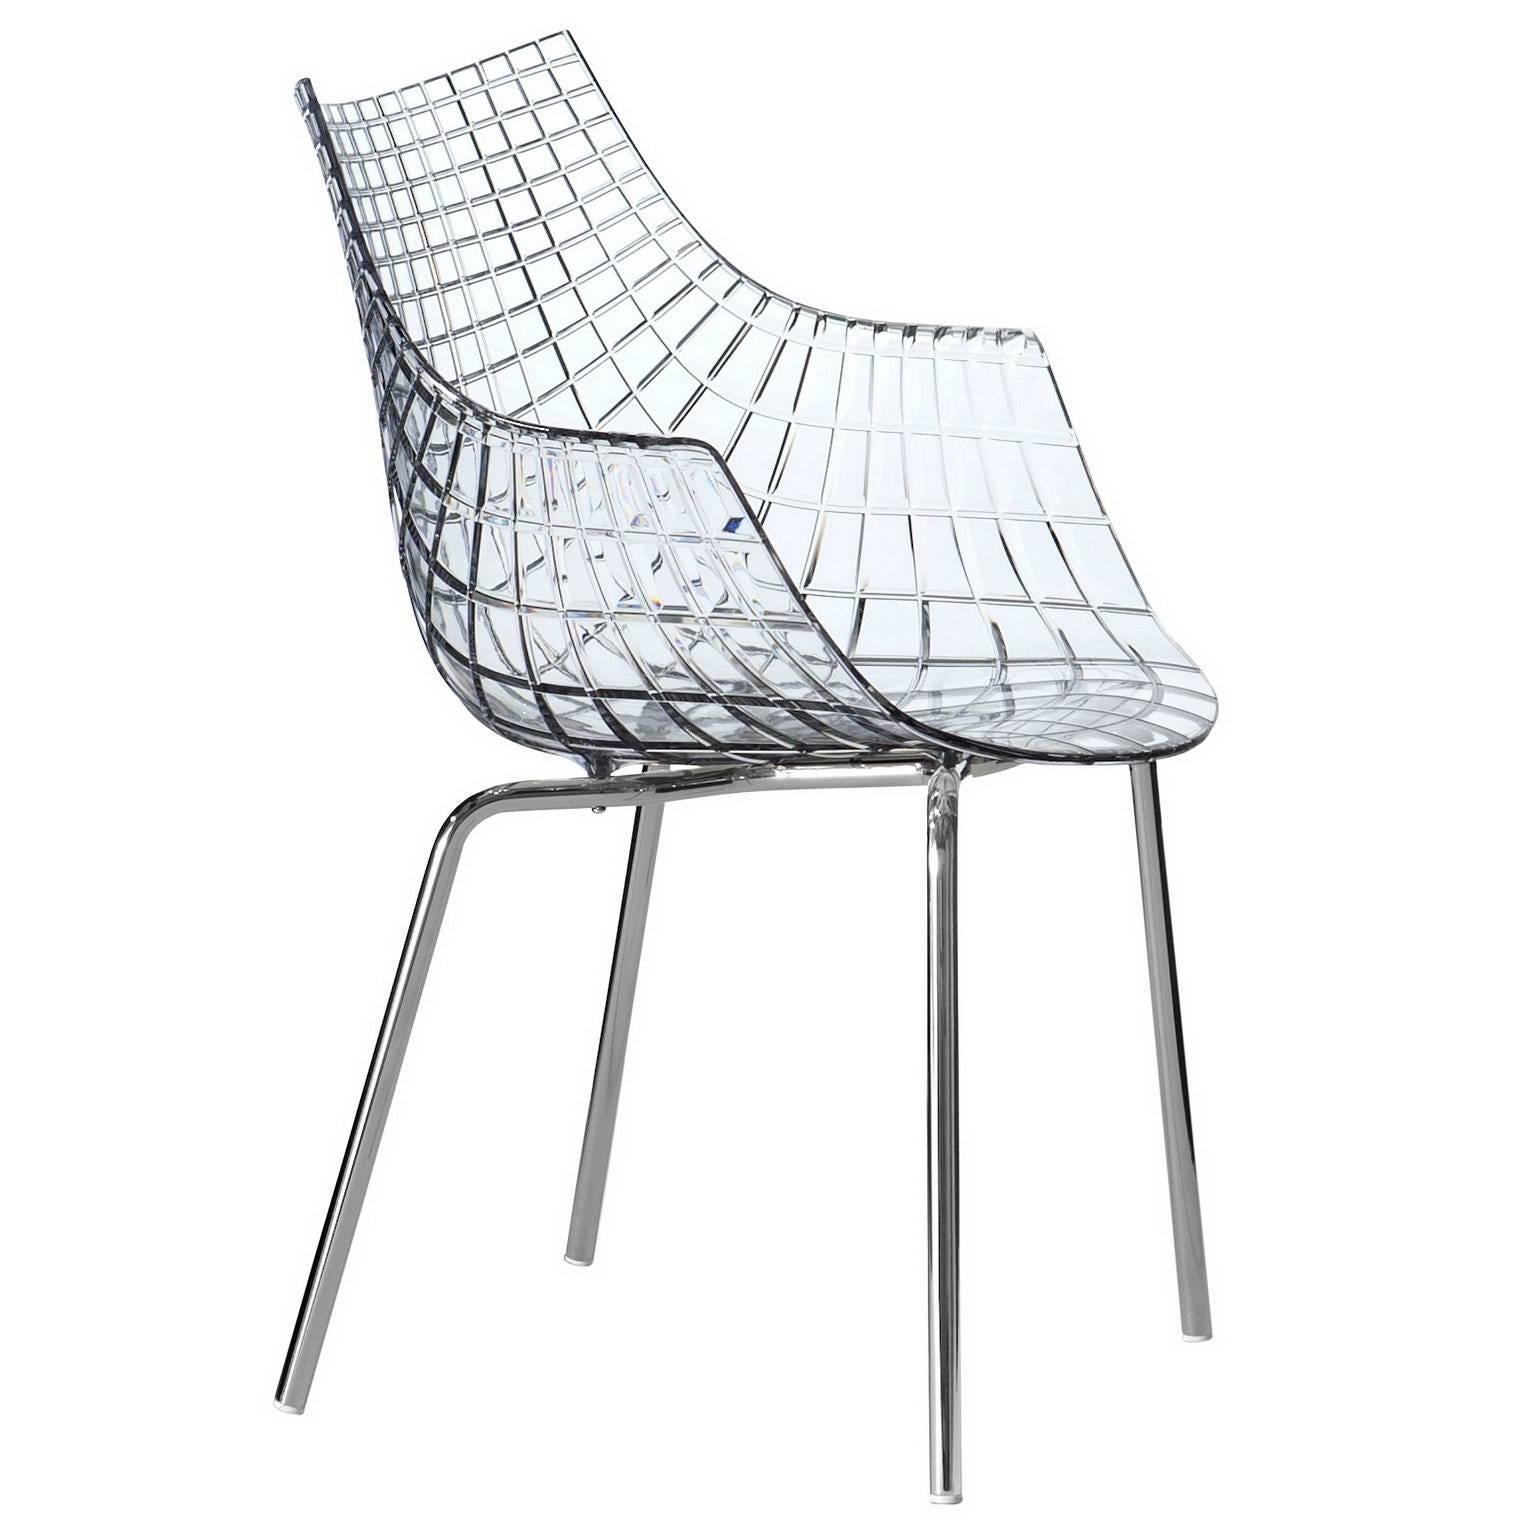 "Meridiana" Polycarbonate and Steel Chair Designed by C. Pillet for Driade